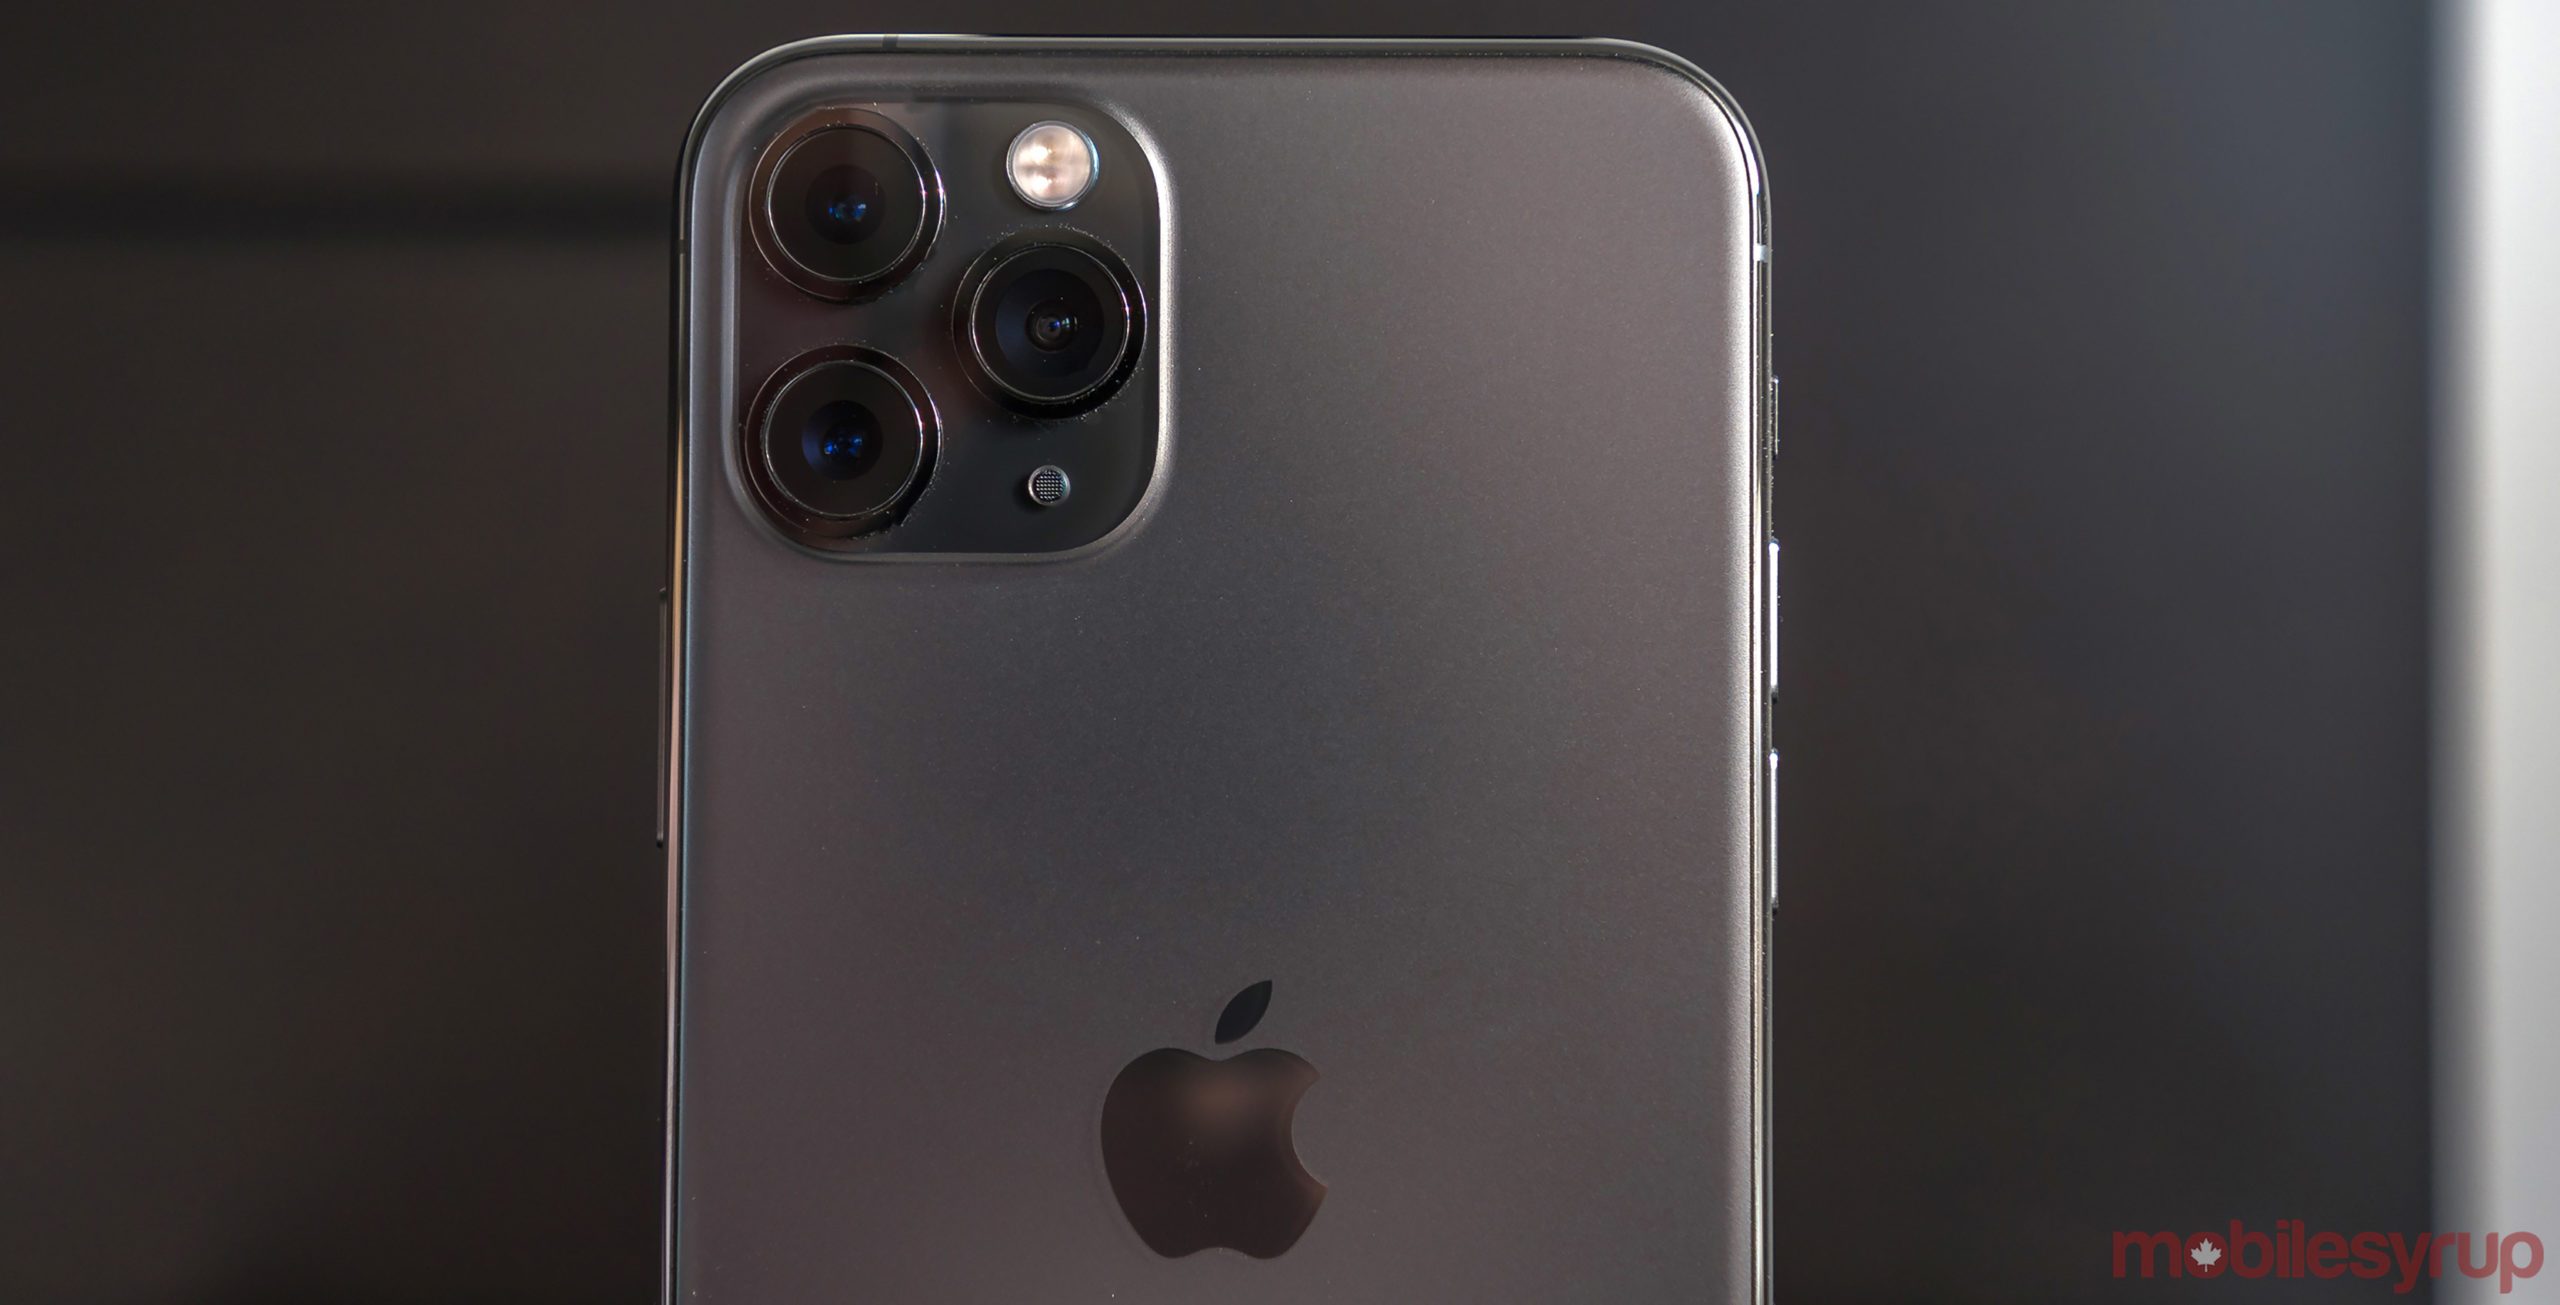 Iphone 11 Pro And 11 Pro Max Camera Review Lighting Up The Night